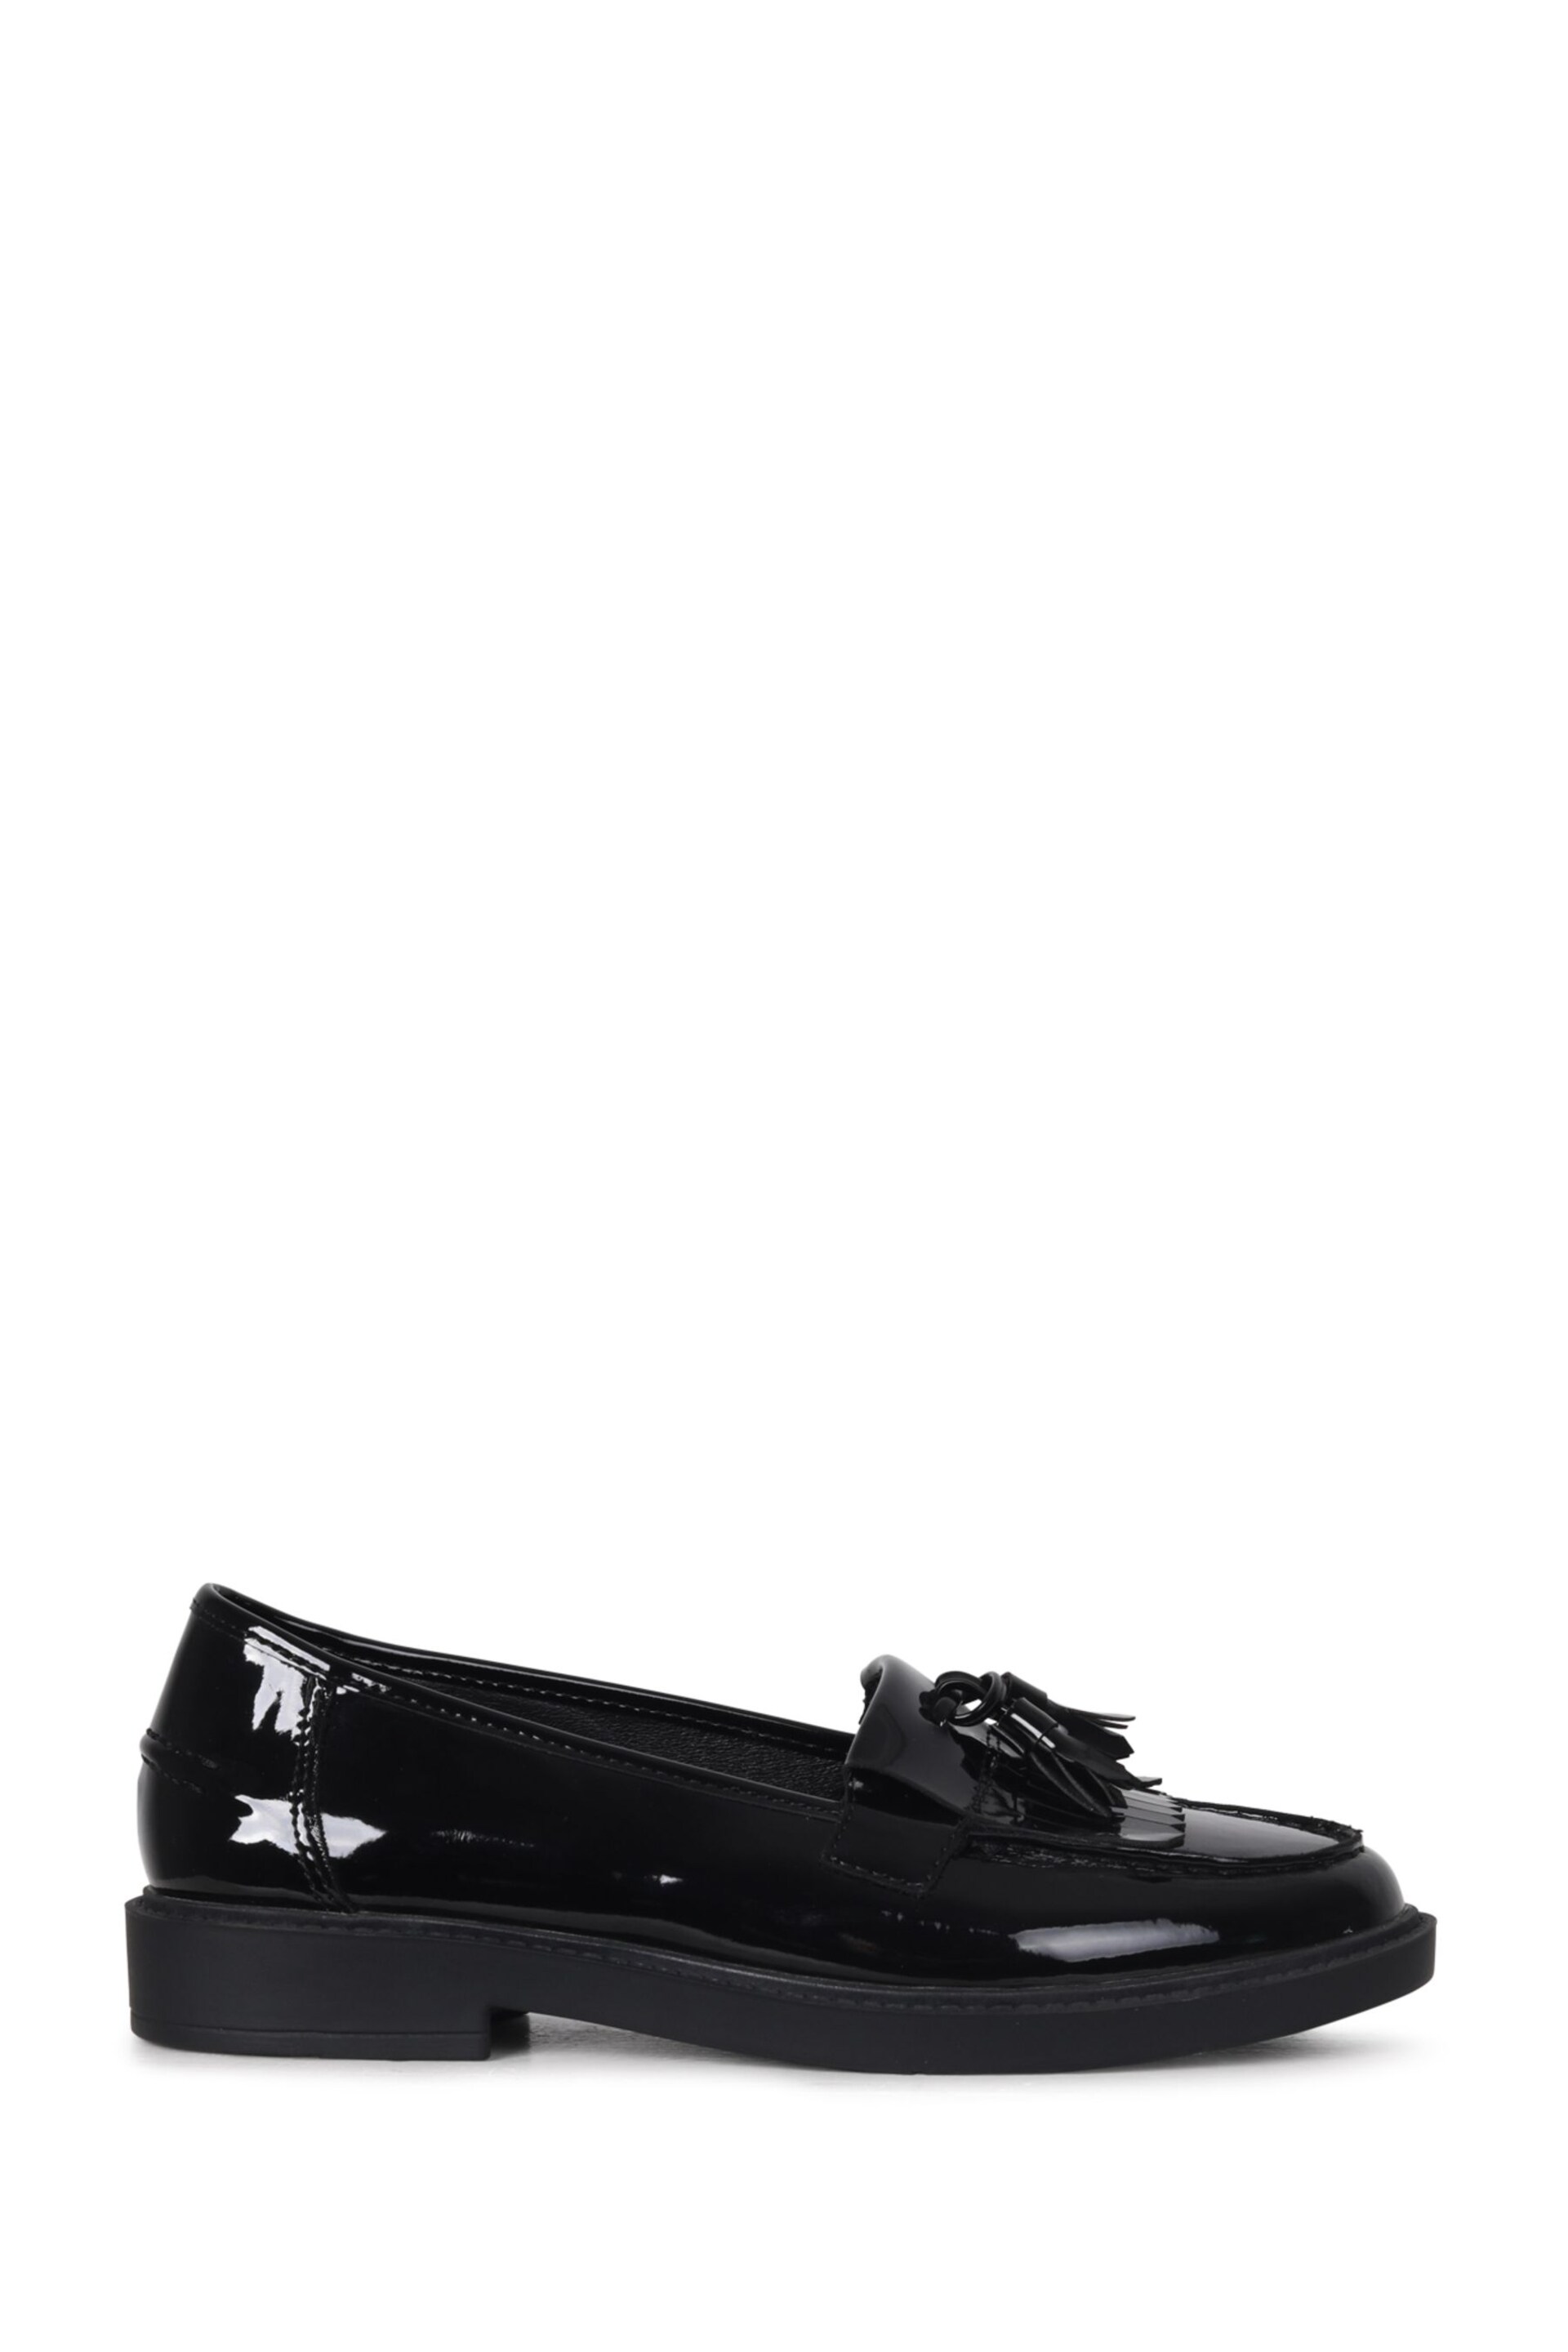 Linzi Black Kamille Black Patent Loafer With Tassel Detail - Image 2 of 4